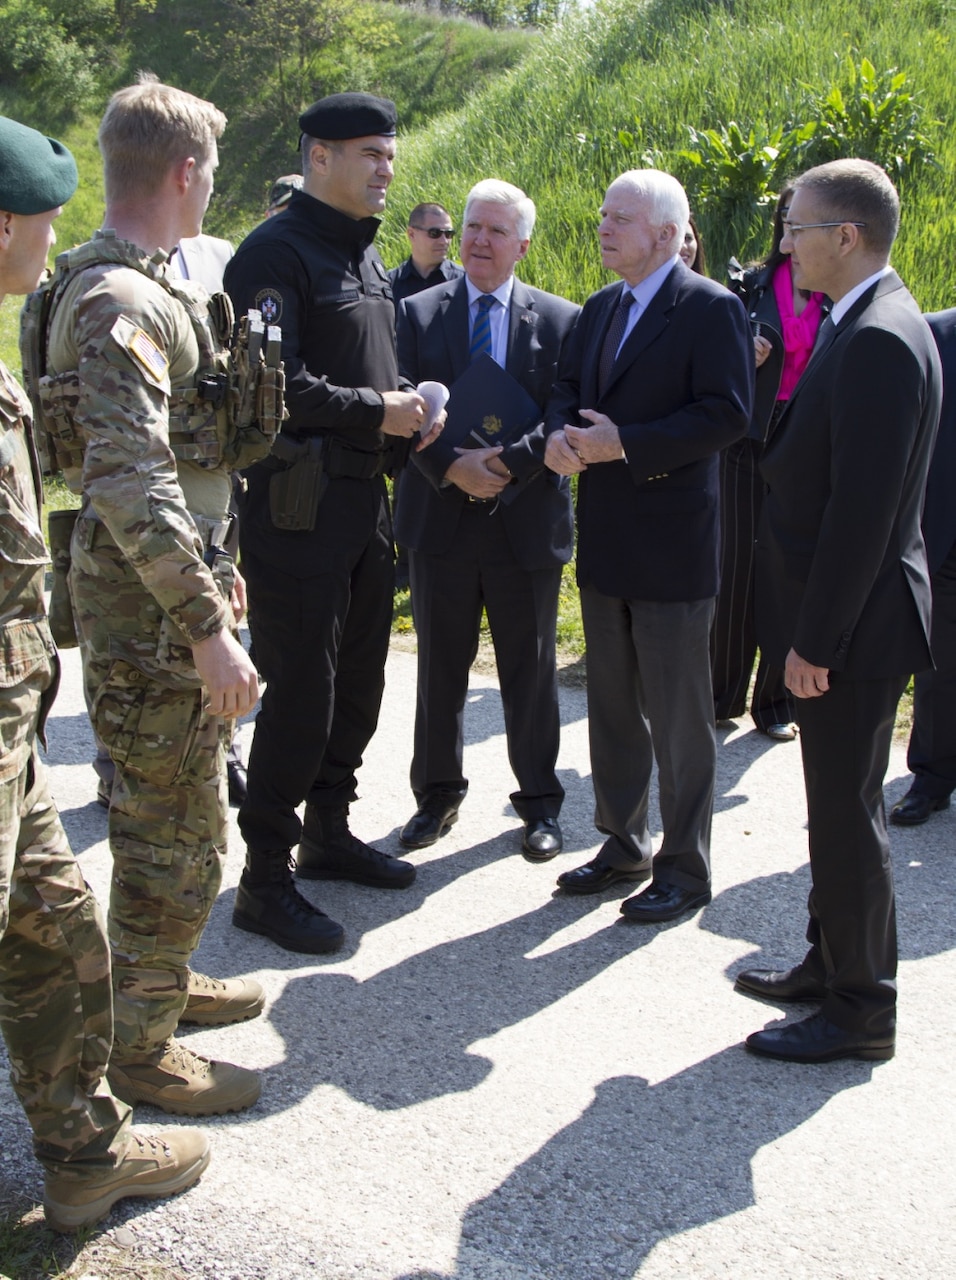 U.S. special operations forces greet U.S. Sen. John McCain, U.S. Ambassador Kyle Randolph Scott, Serbian Minister of Internal Affairs, Nebojsa Stefanovic and Serbian special anti-terrorist unit commander, Spasoje Vulevic, during a joint combined exchange training exercise at the unit’s headquarters complex in Serbia, April 10, 2017. The unit serves as a special operations and tactical unit of the Serbian police and received training from April 3-30 in a variety of tactics and techniques over the course of the JCET to increase their effectiveness in future operations. Army photo by Sgt. Nelson Robles